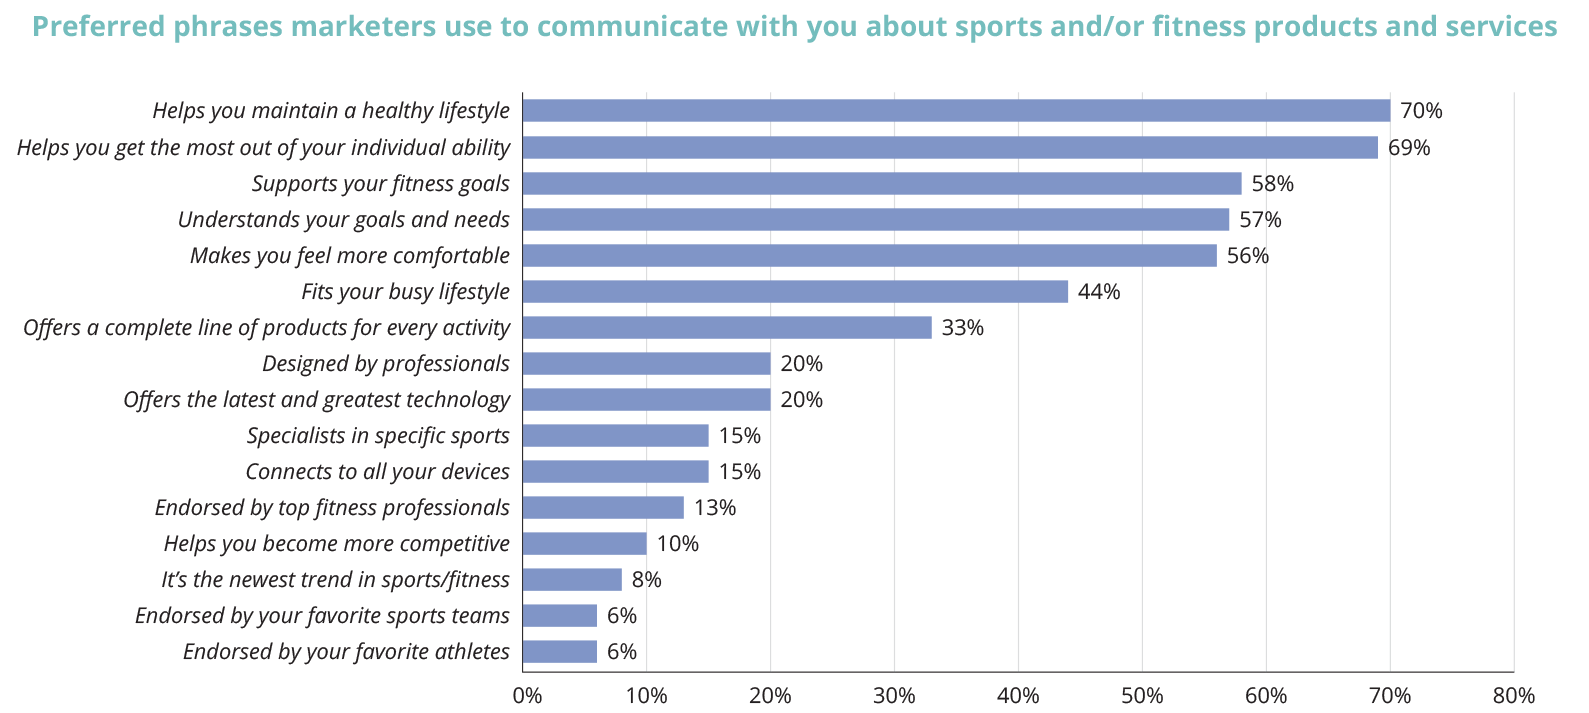 Chart: Preferred phrases marketers use to communicate with you about sports and/or fitness products and services.